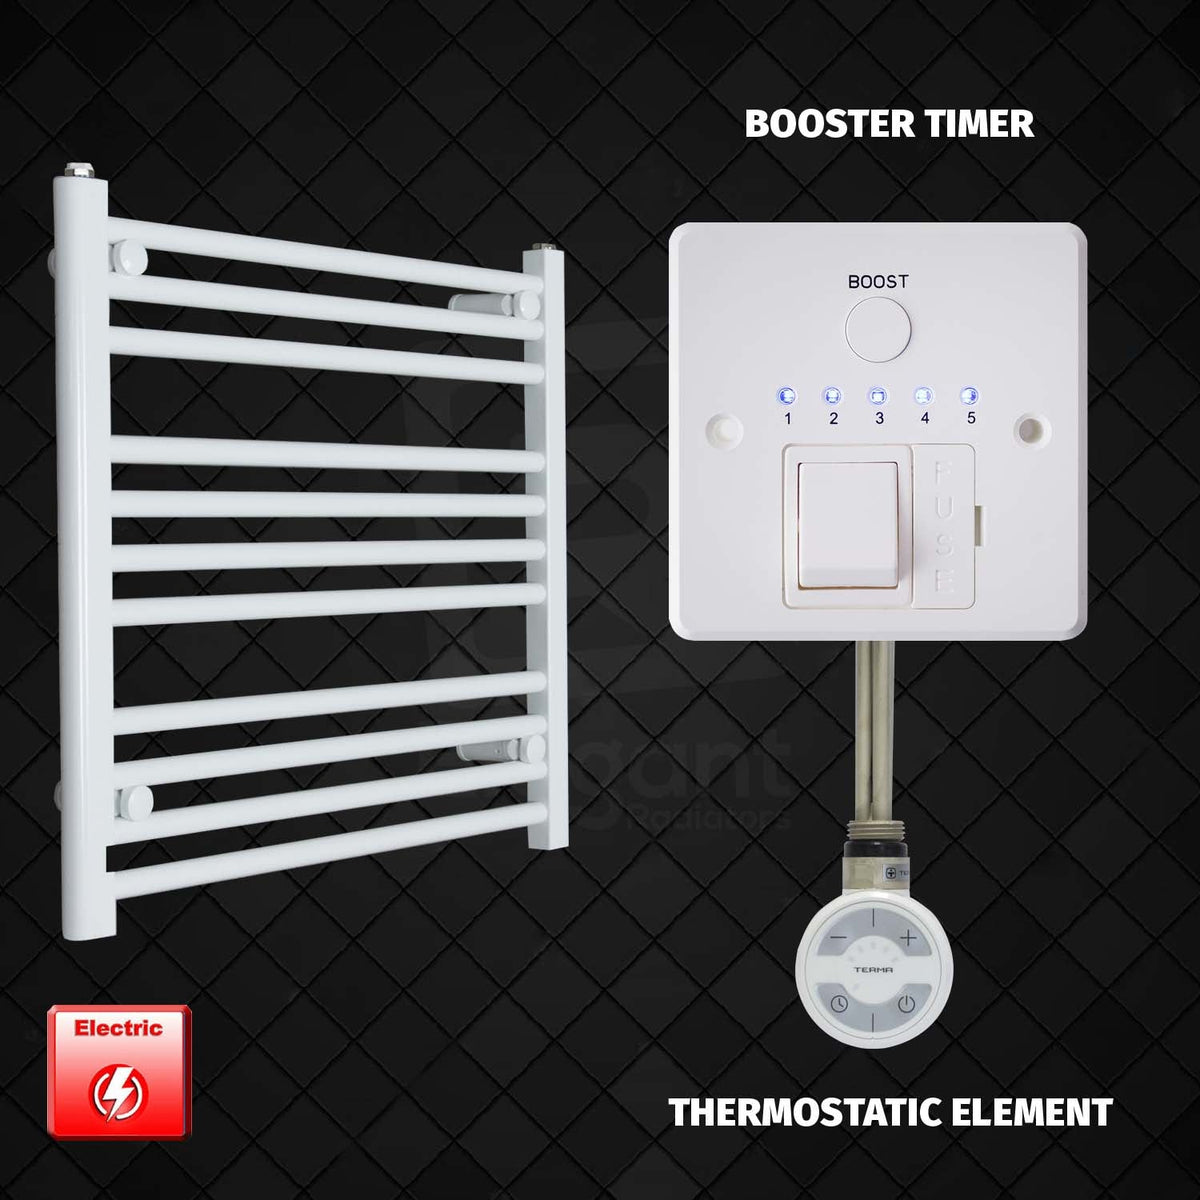 600 mm High 600 mm Wide Pre-Filled Electric Heated Towel Rail Radiator White HTR MOA Thermostatic Element Booster Timer